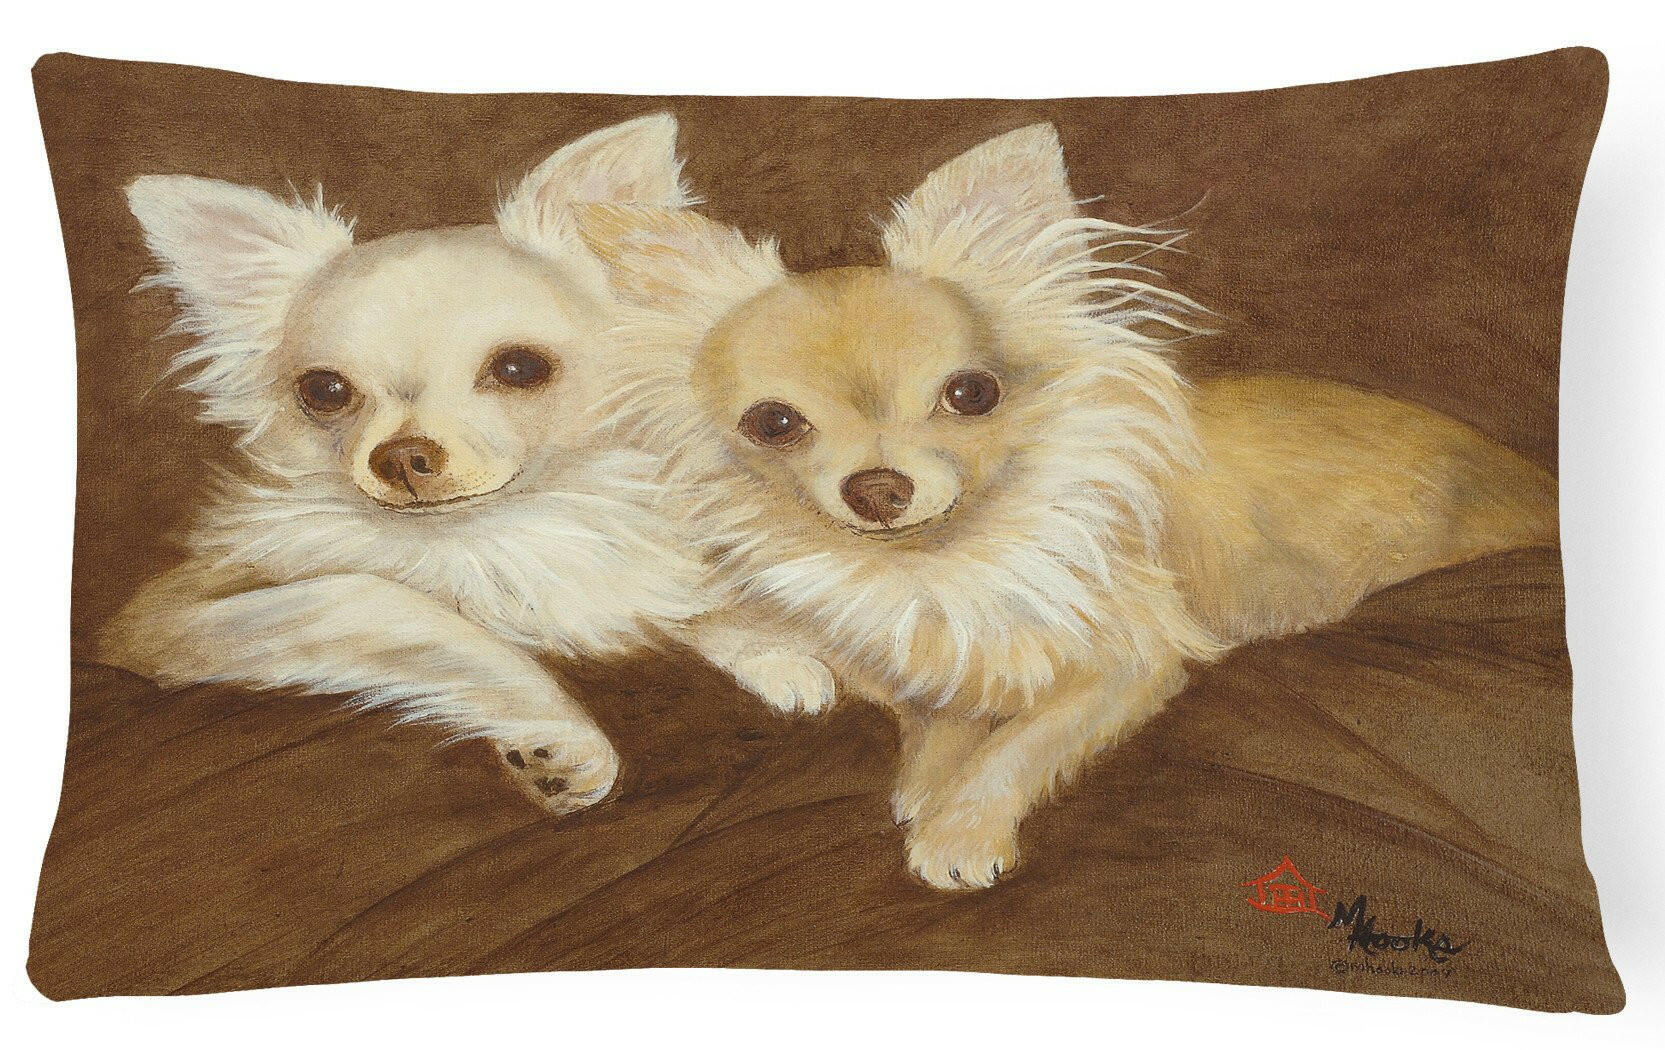 Chihuahua For the Pair Fabric Decorative Pillow MH1042PW1216 by Caroline's Treasures